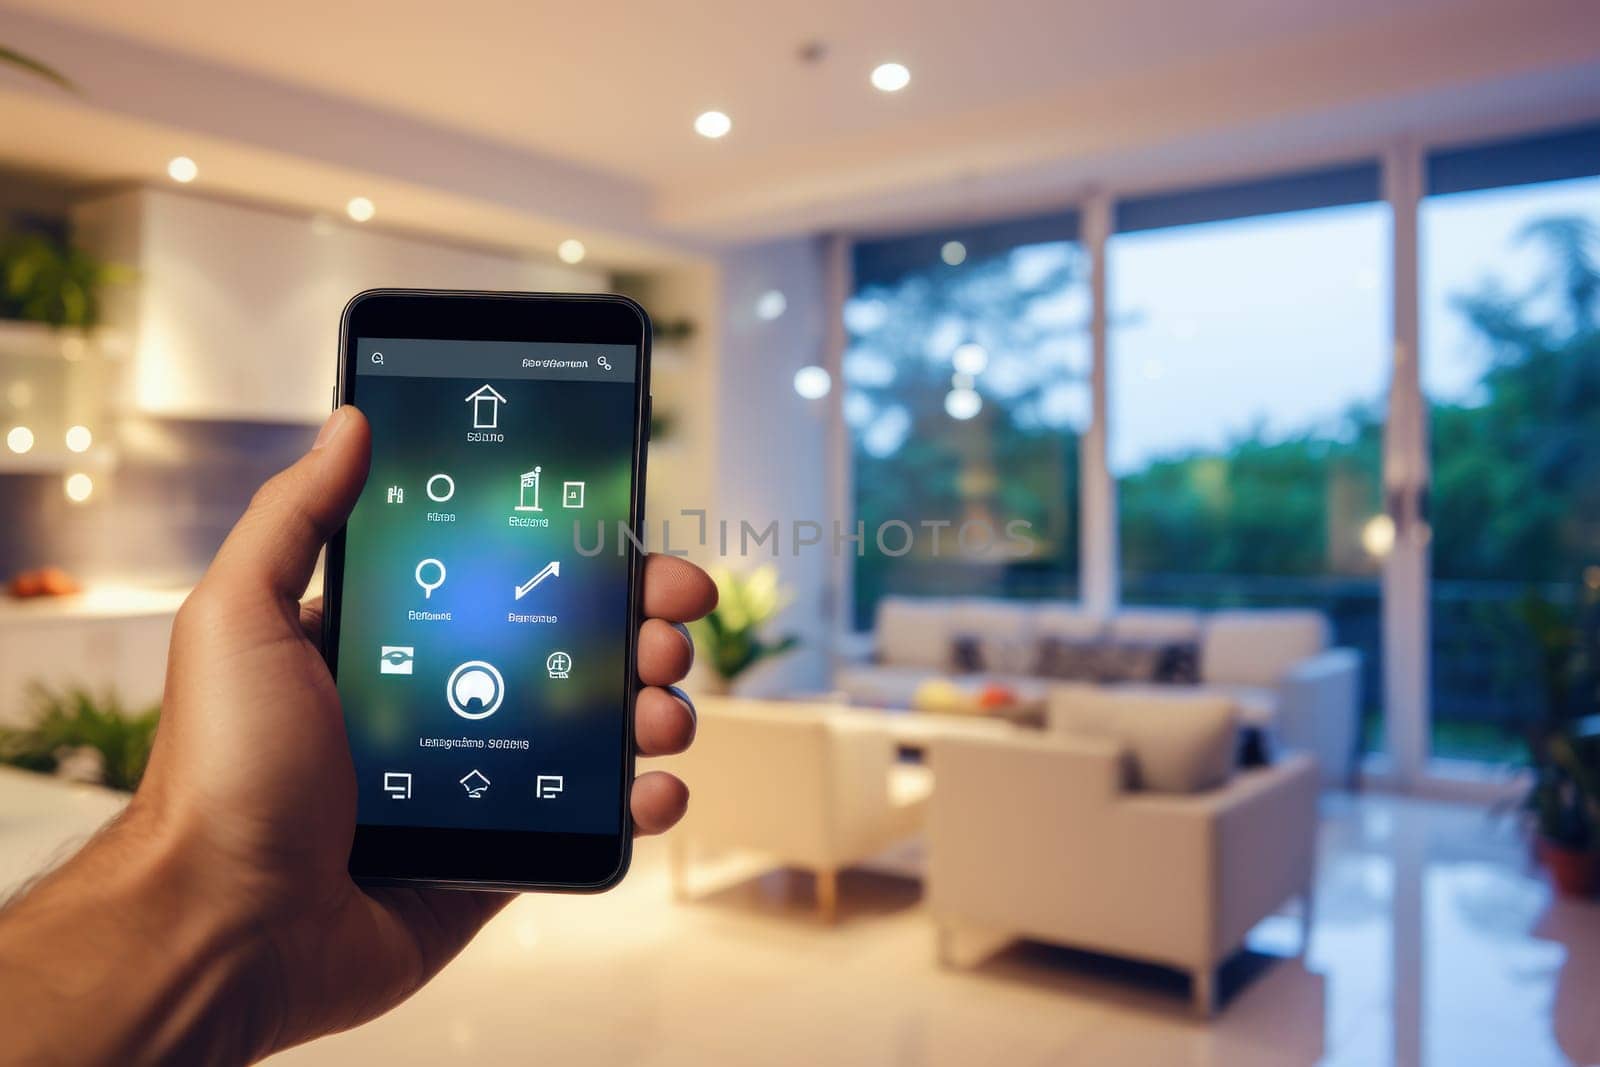 A person controlling smart home devices, Smart home management system using augmented reality.